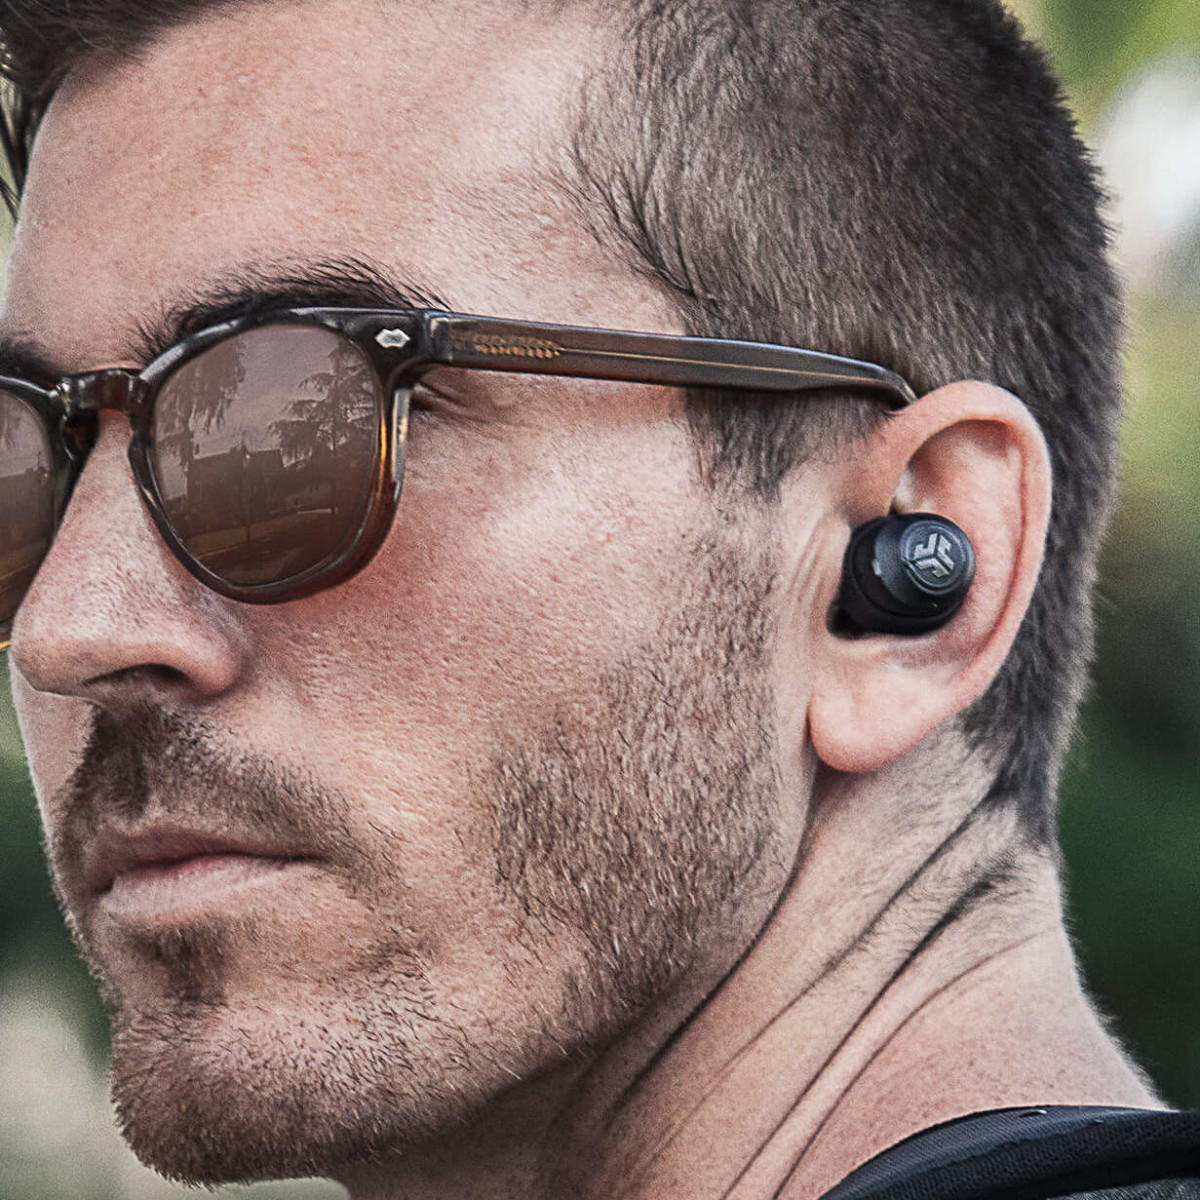 JLab Audio JBuds Air True Wireless Earbuds offer a full 24 hours of battery life